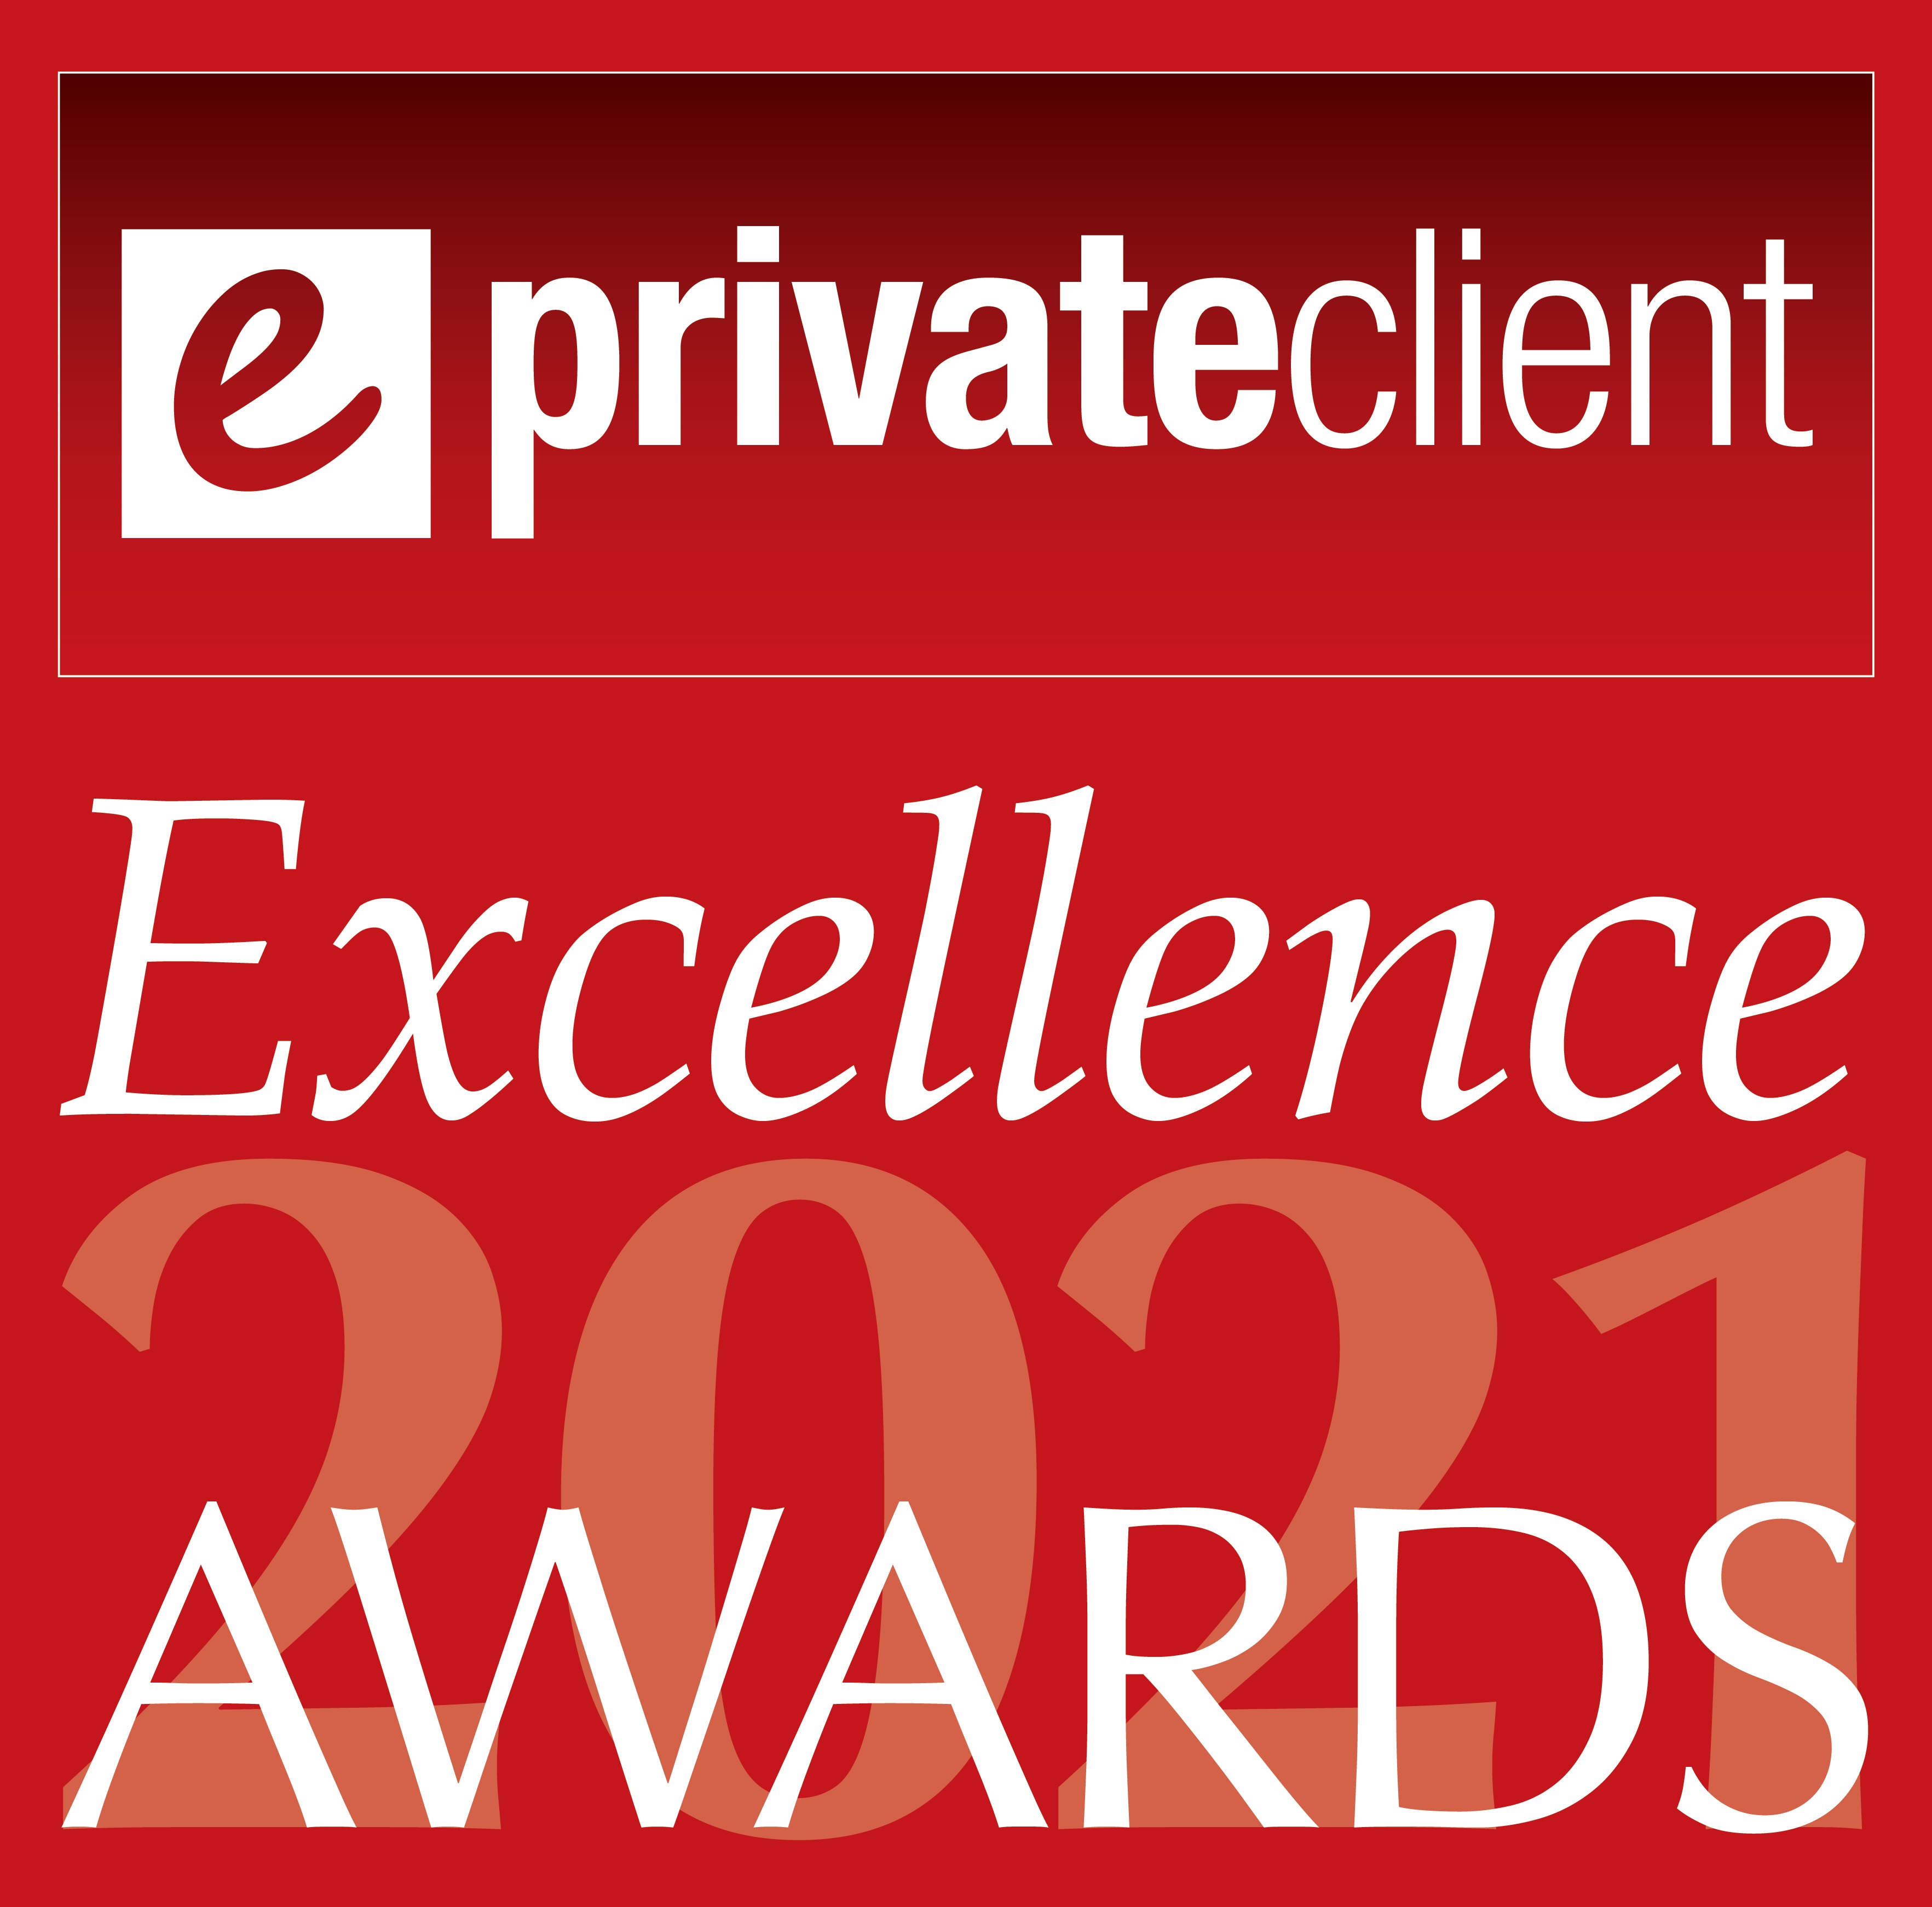 2021 eprivateclient Excellence Awards special report now out